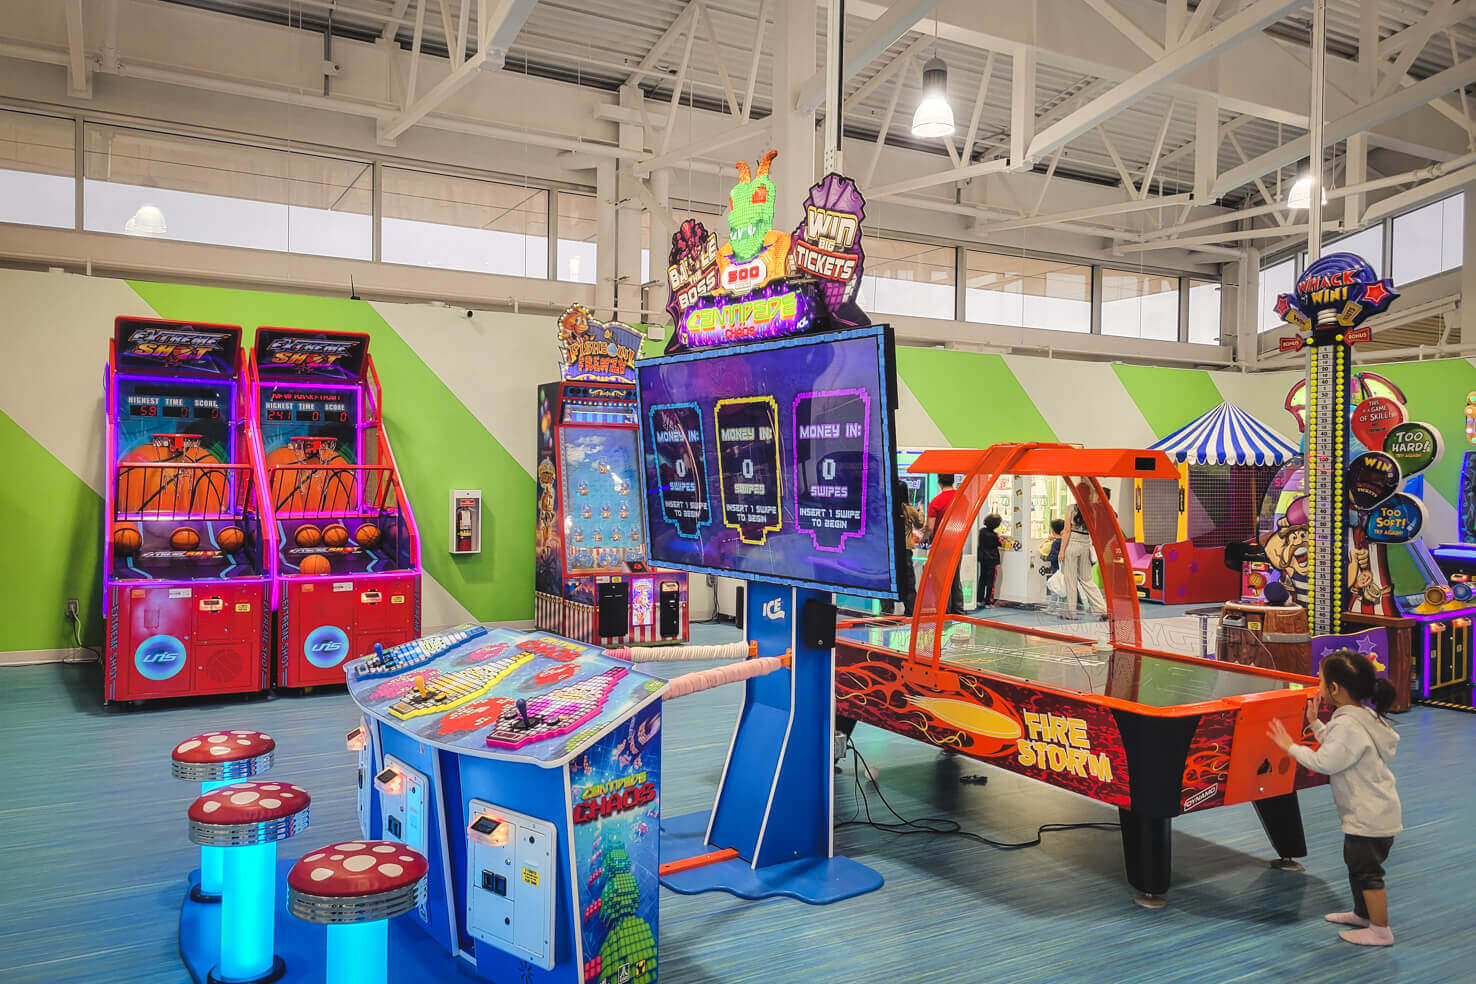 Sky Castle Indoor Playground: Our Review and Tips for Visiting